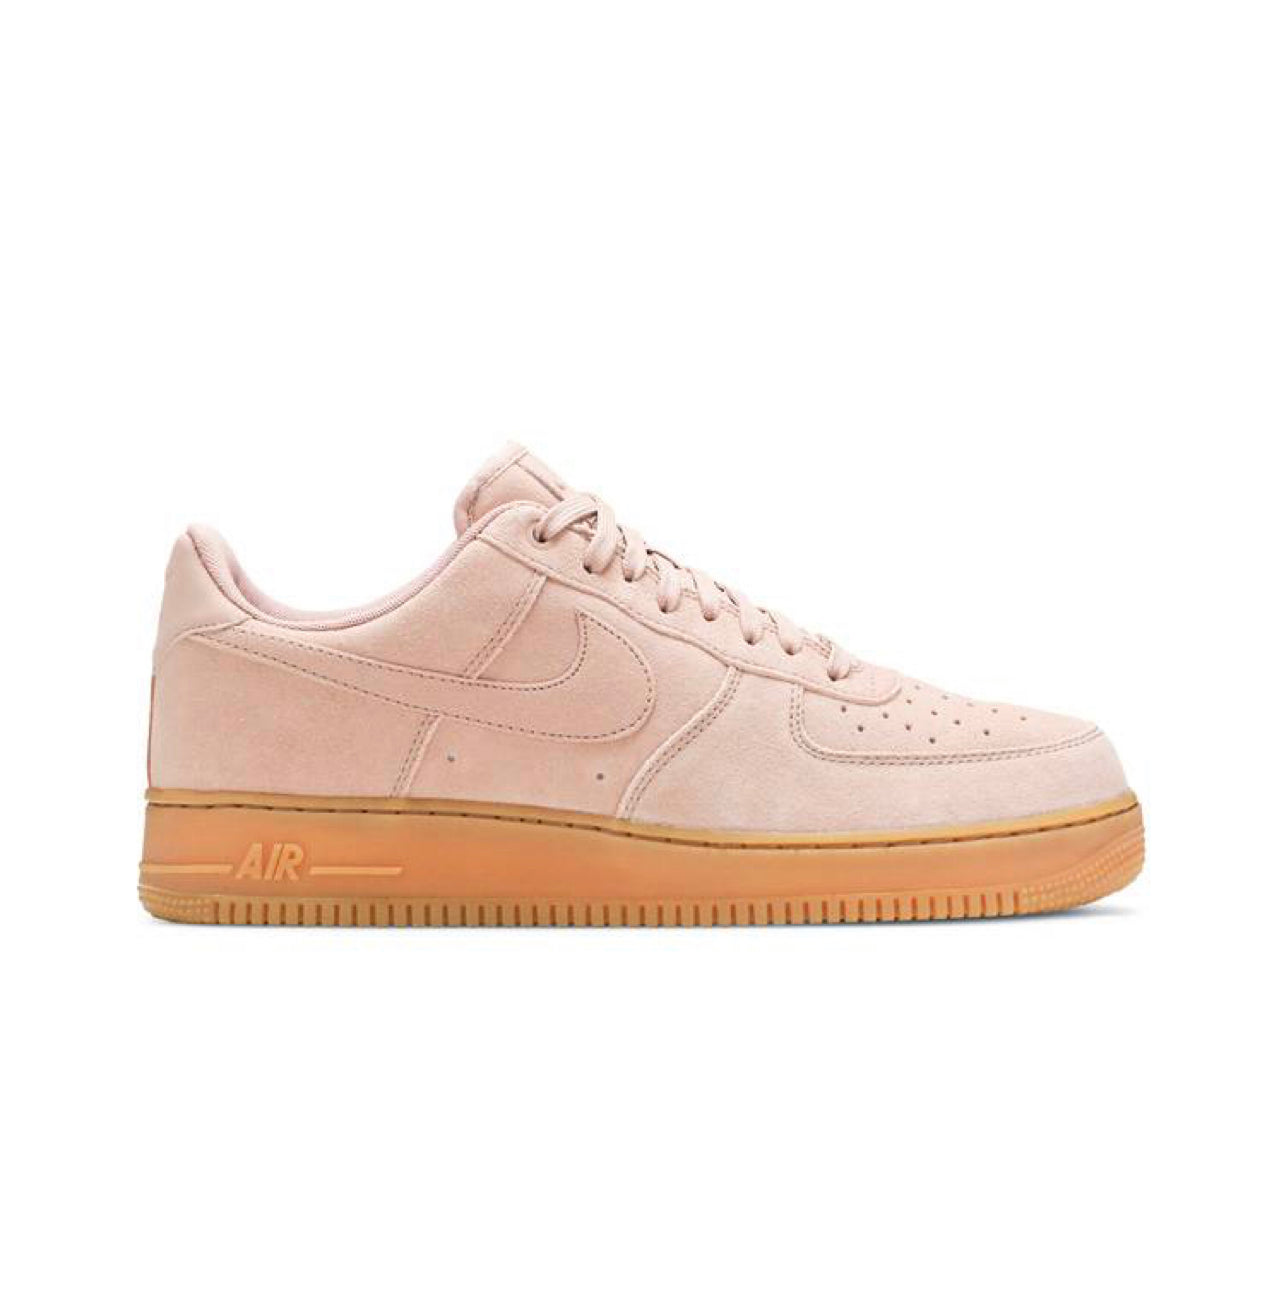 Nike Air Force 1 '07 Lv8 Suede Particle Pink, AA1117-600